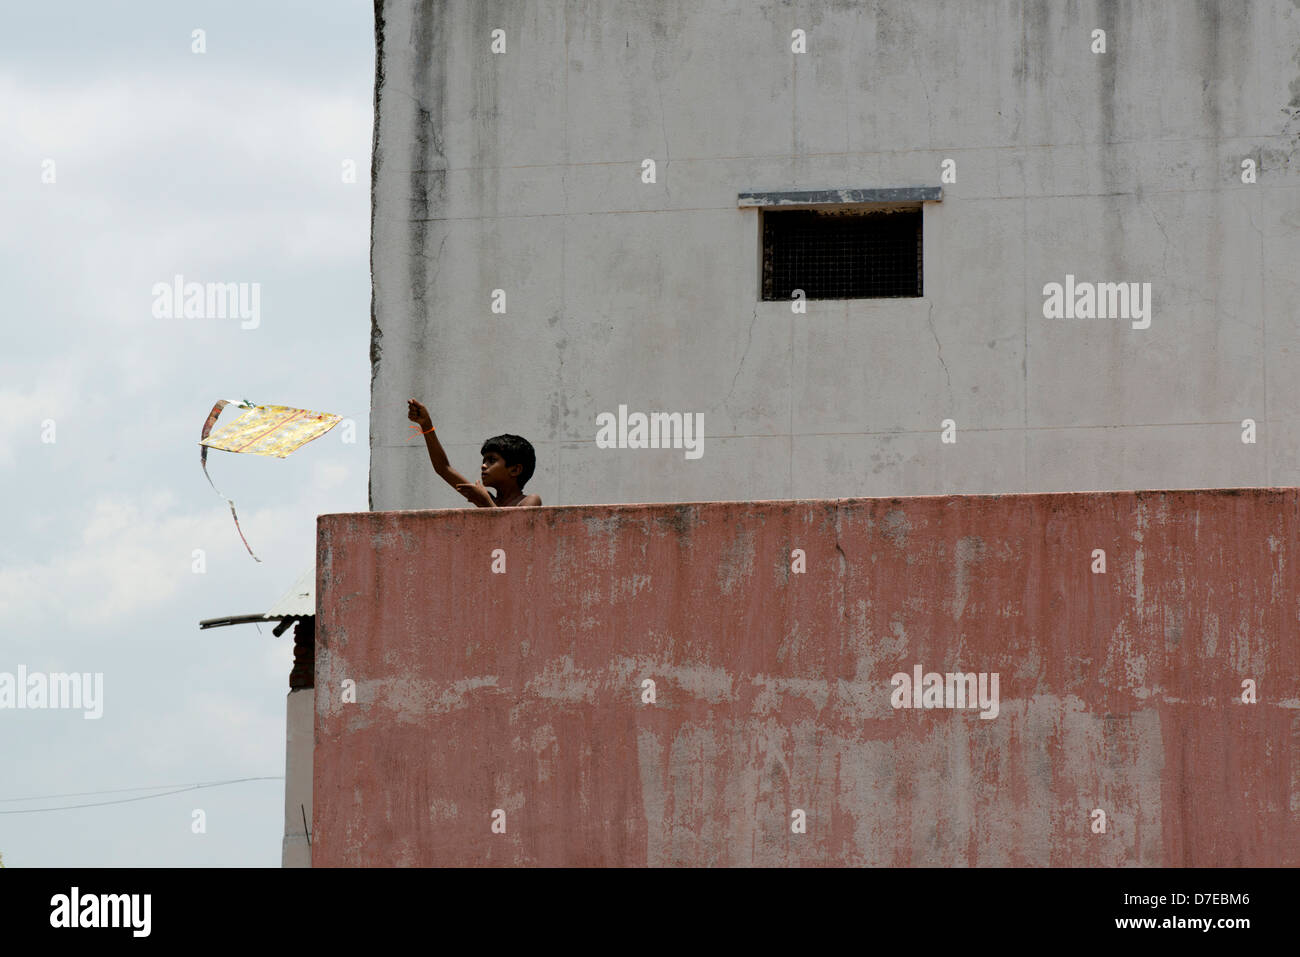 A boy launches his kite from a rooftop in Tiruvannamalai, Tamil Nadu, India Stock Photo